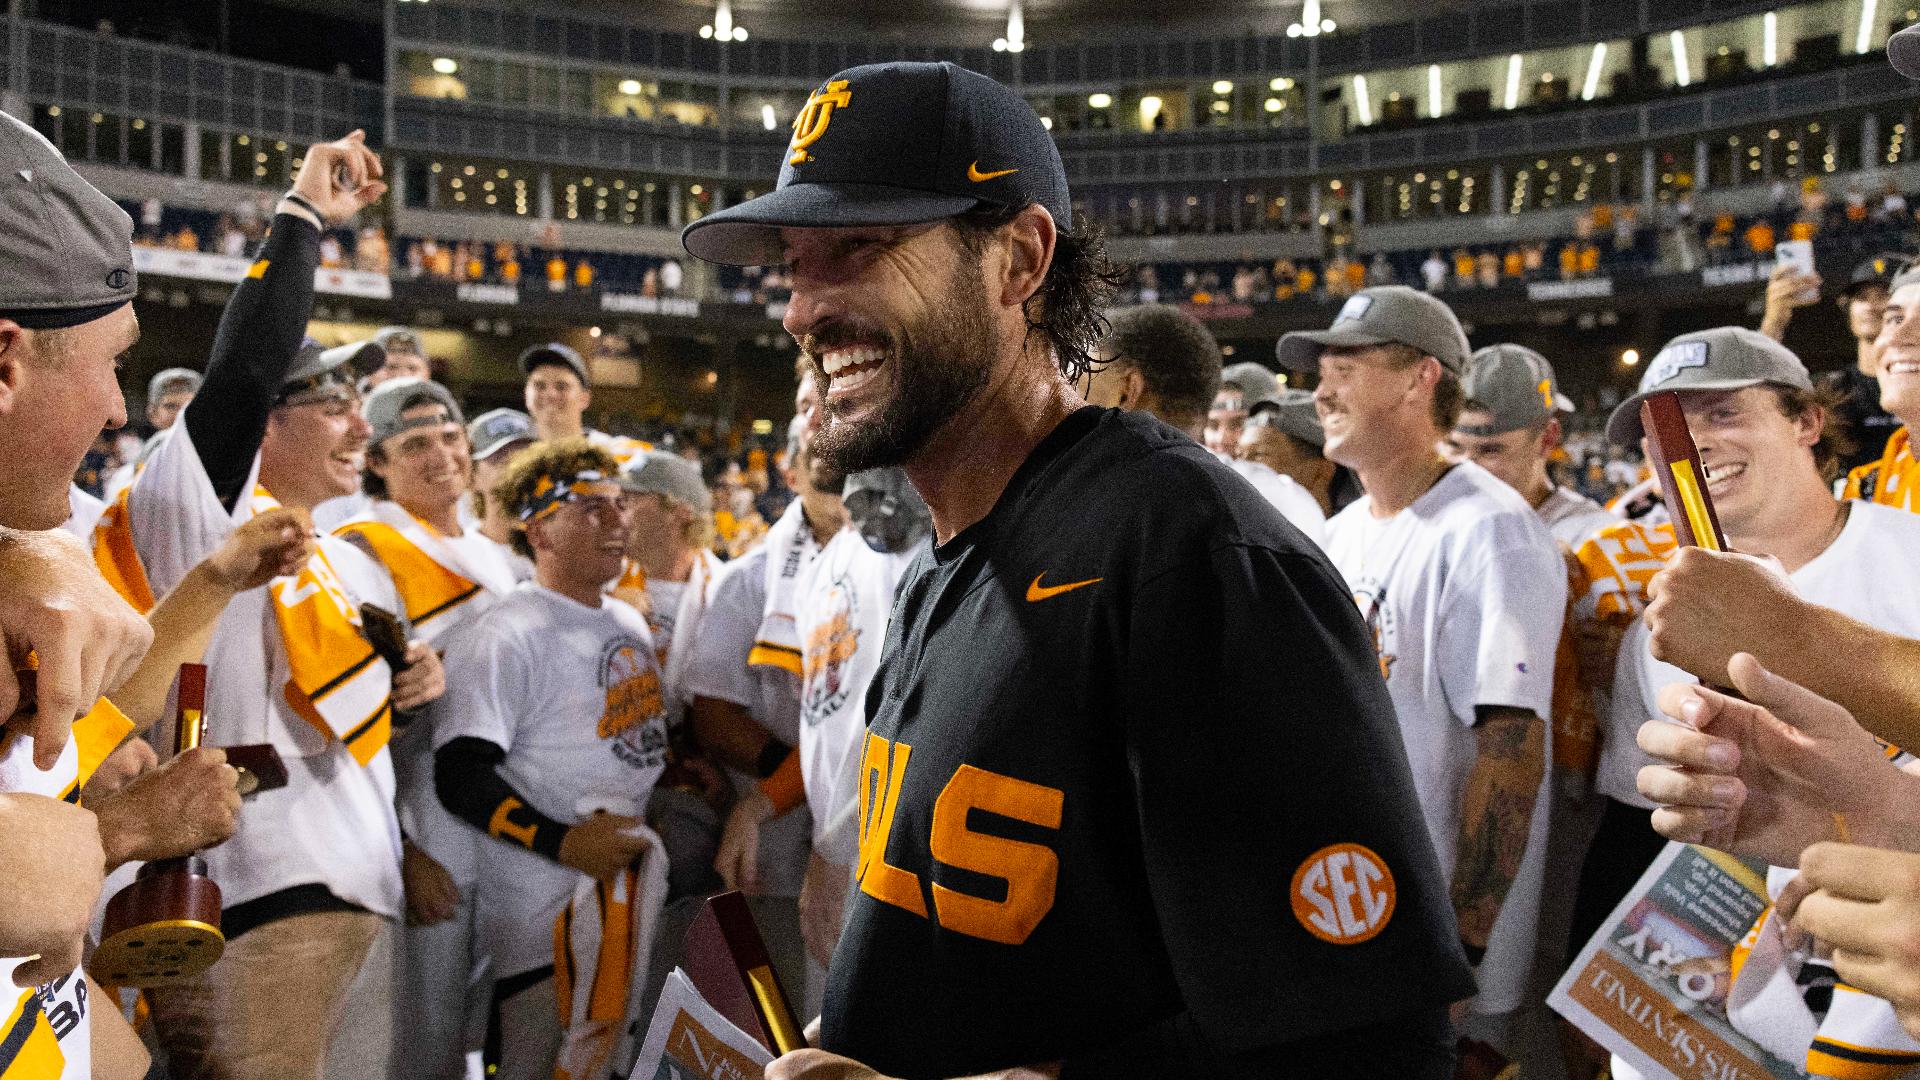 The coach earns most of his pay through broadcast and sponsor agreements, but a win at the College World Series would still give him a nice payday.